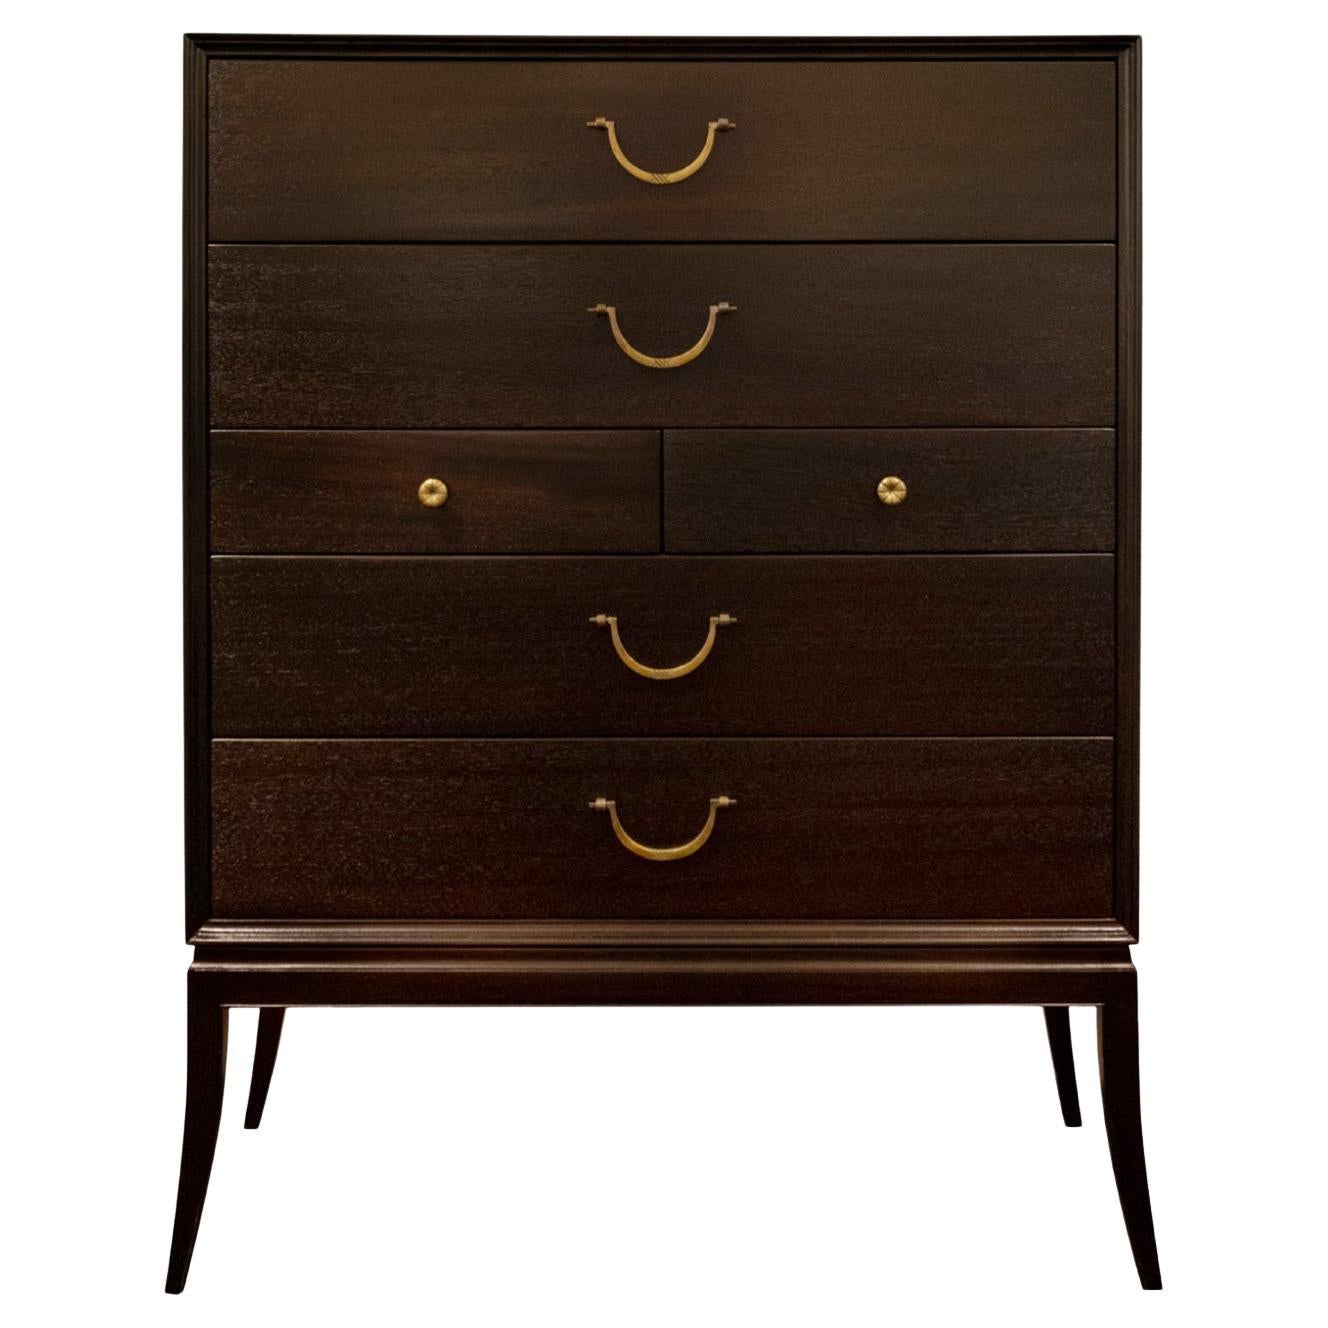 Tommi Parzinger Elegant Chest of Drawers with Etched Brass Pulls 1950s (Signed) For Sale